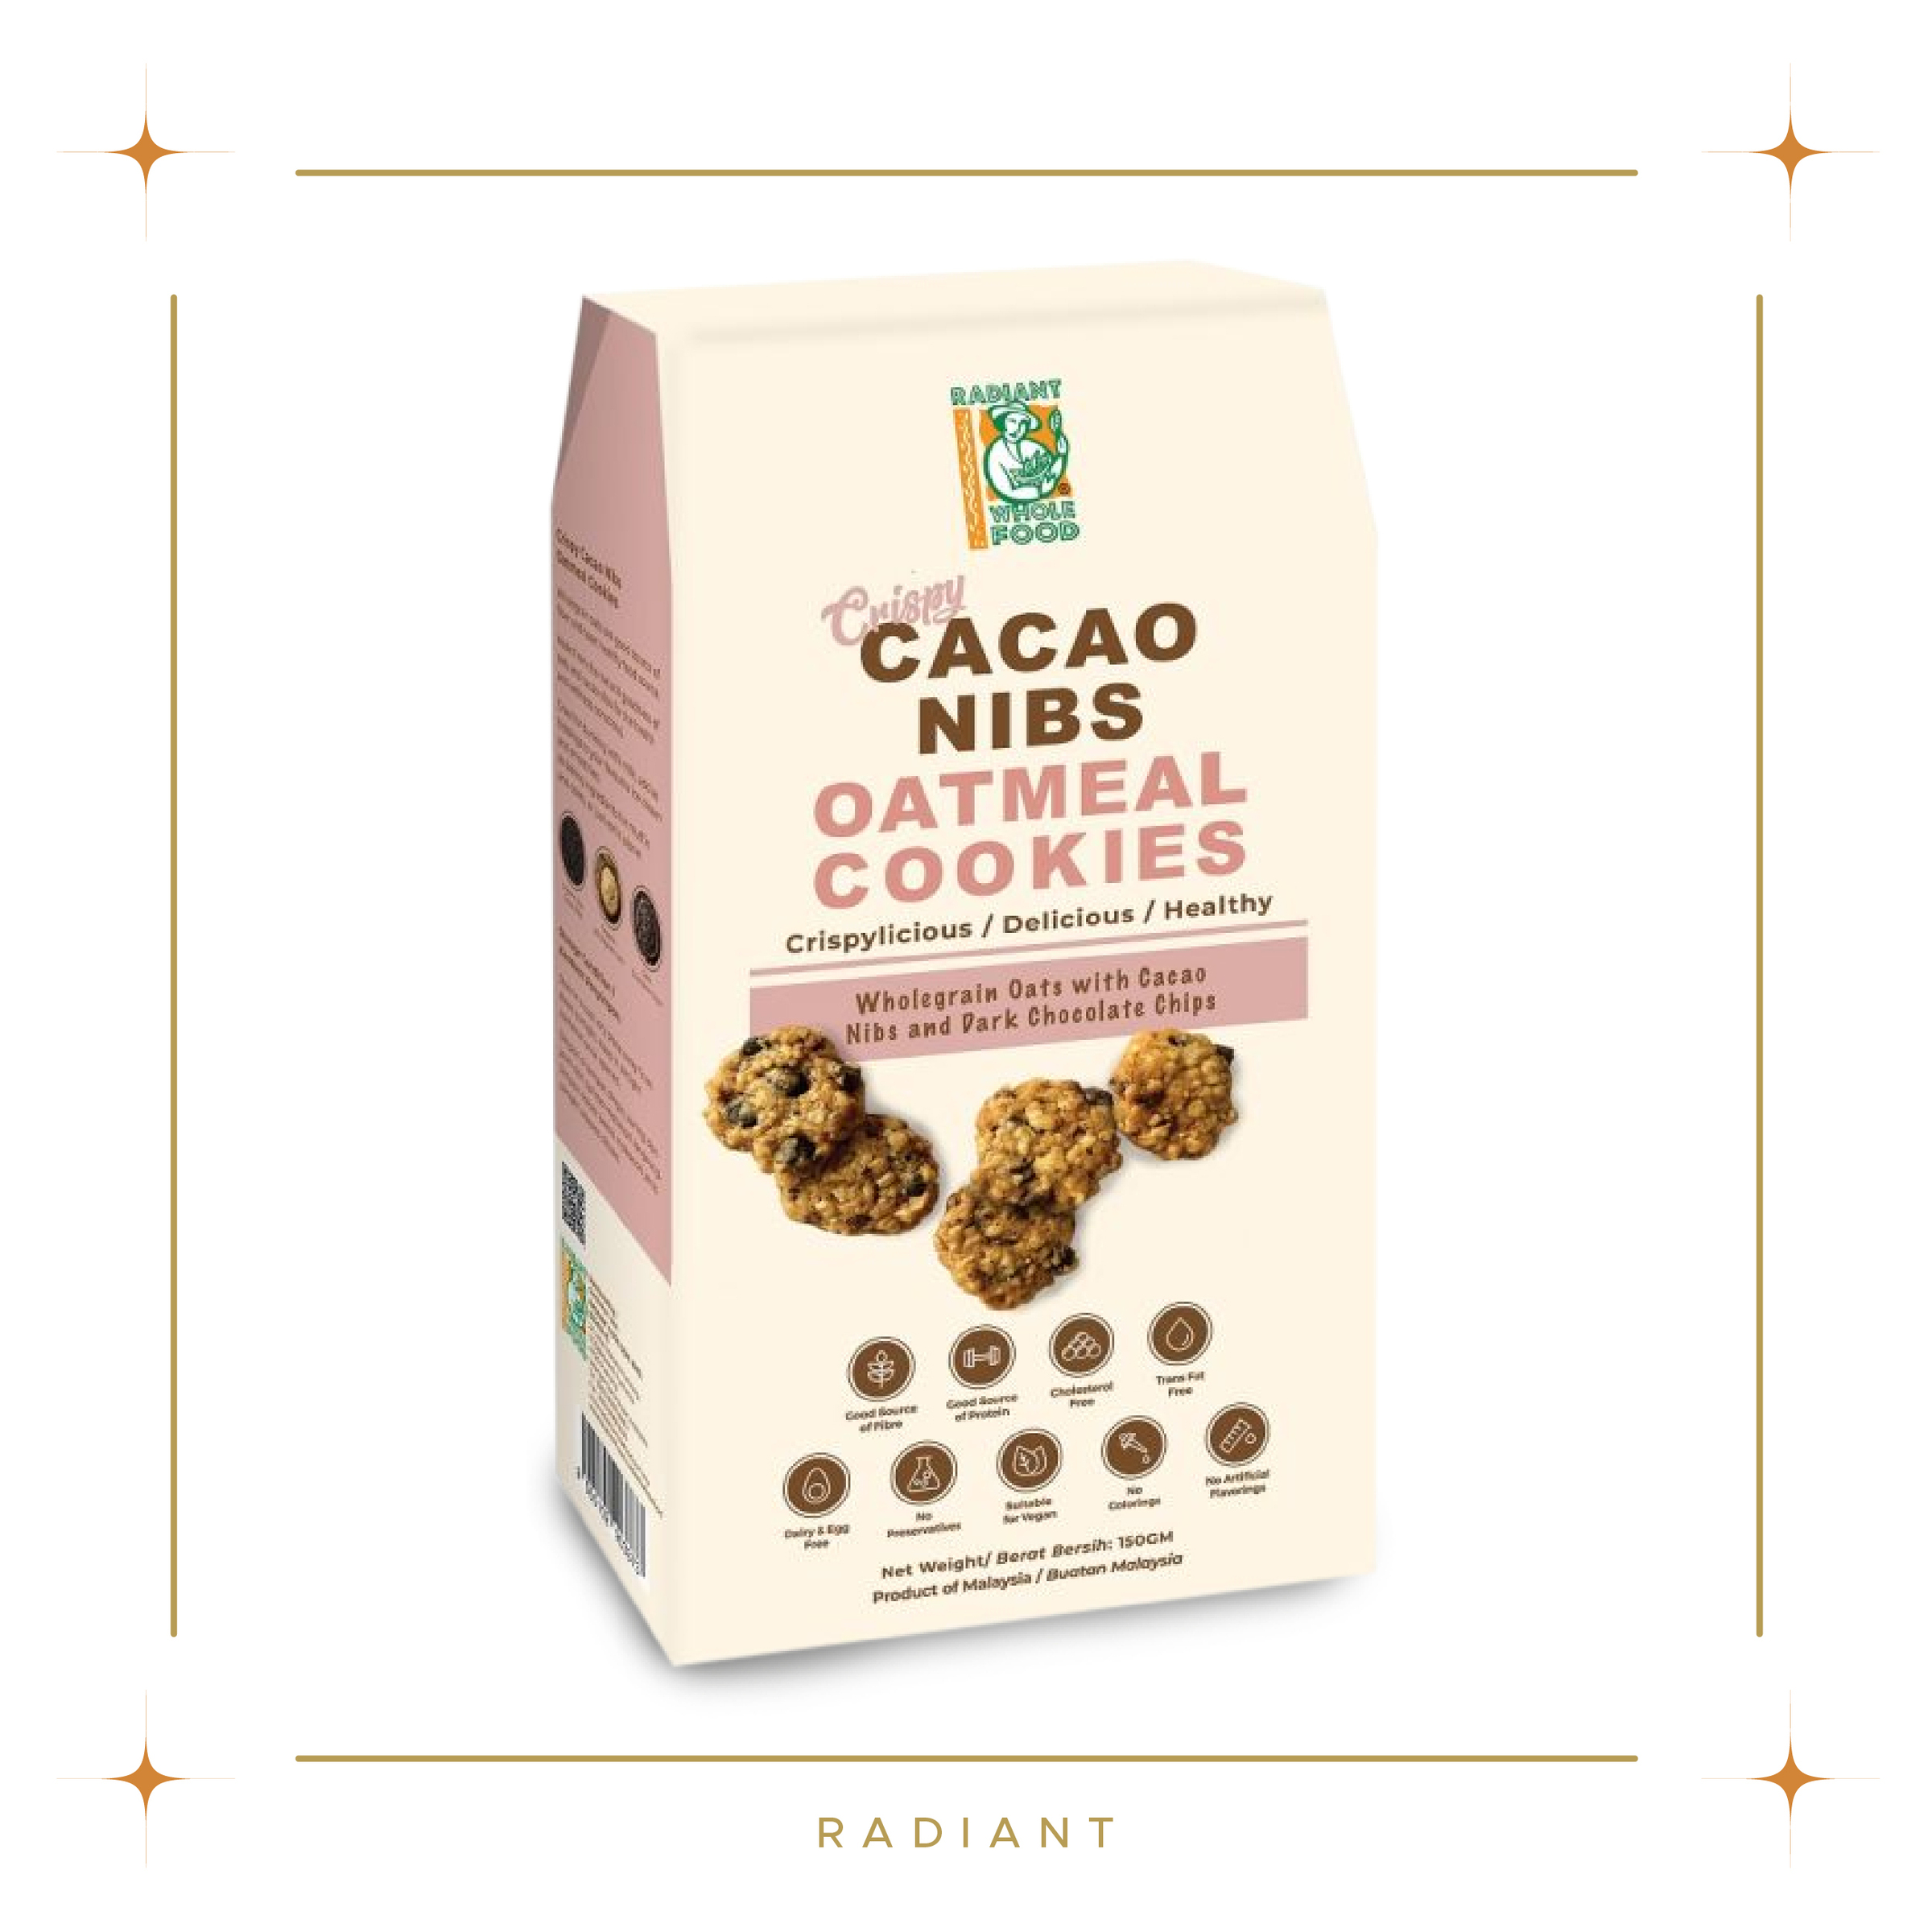 Radiant Product-2_Radiant Crispy Cacao Nibs Oatmeal Cookies